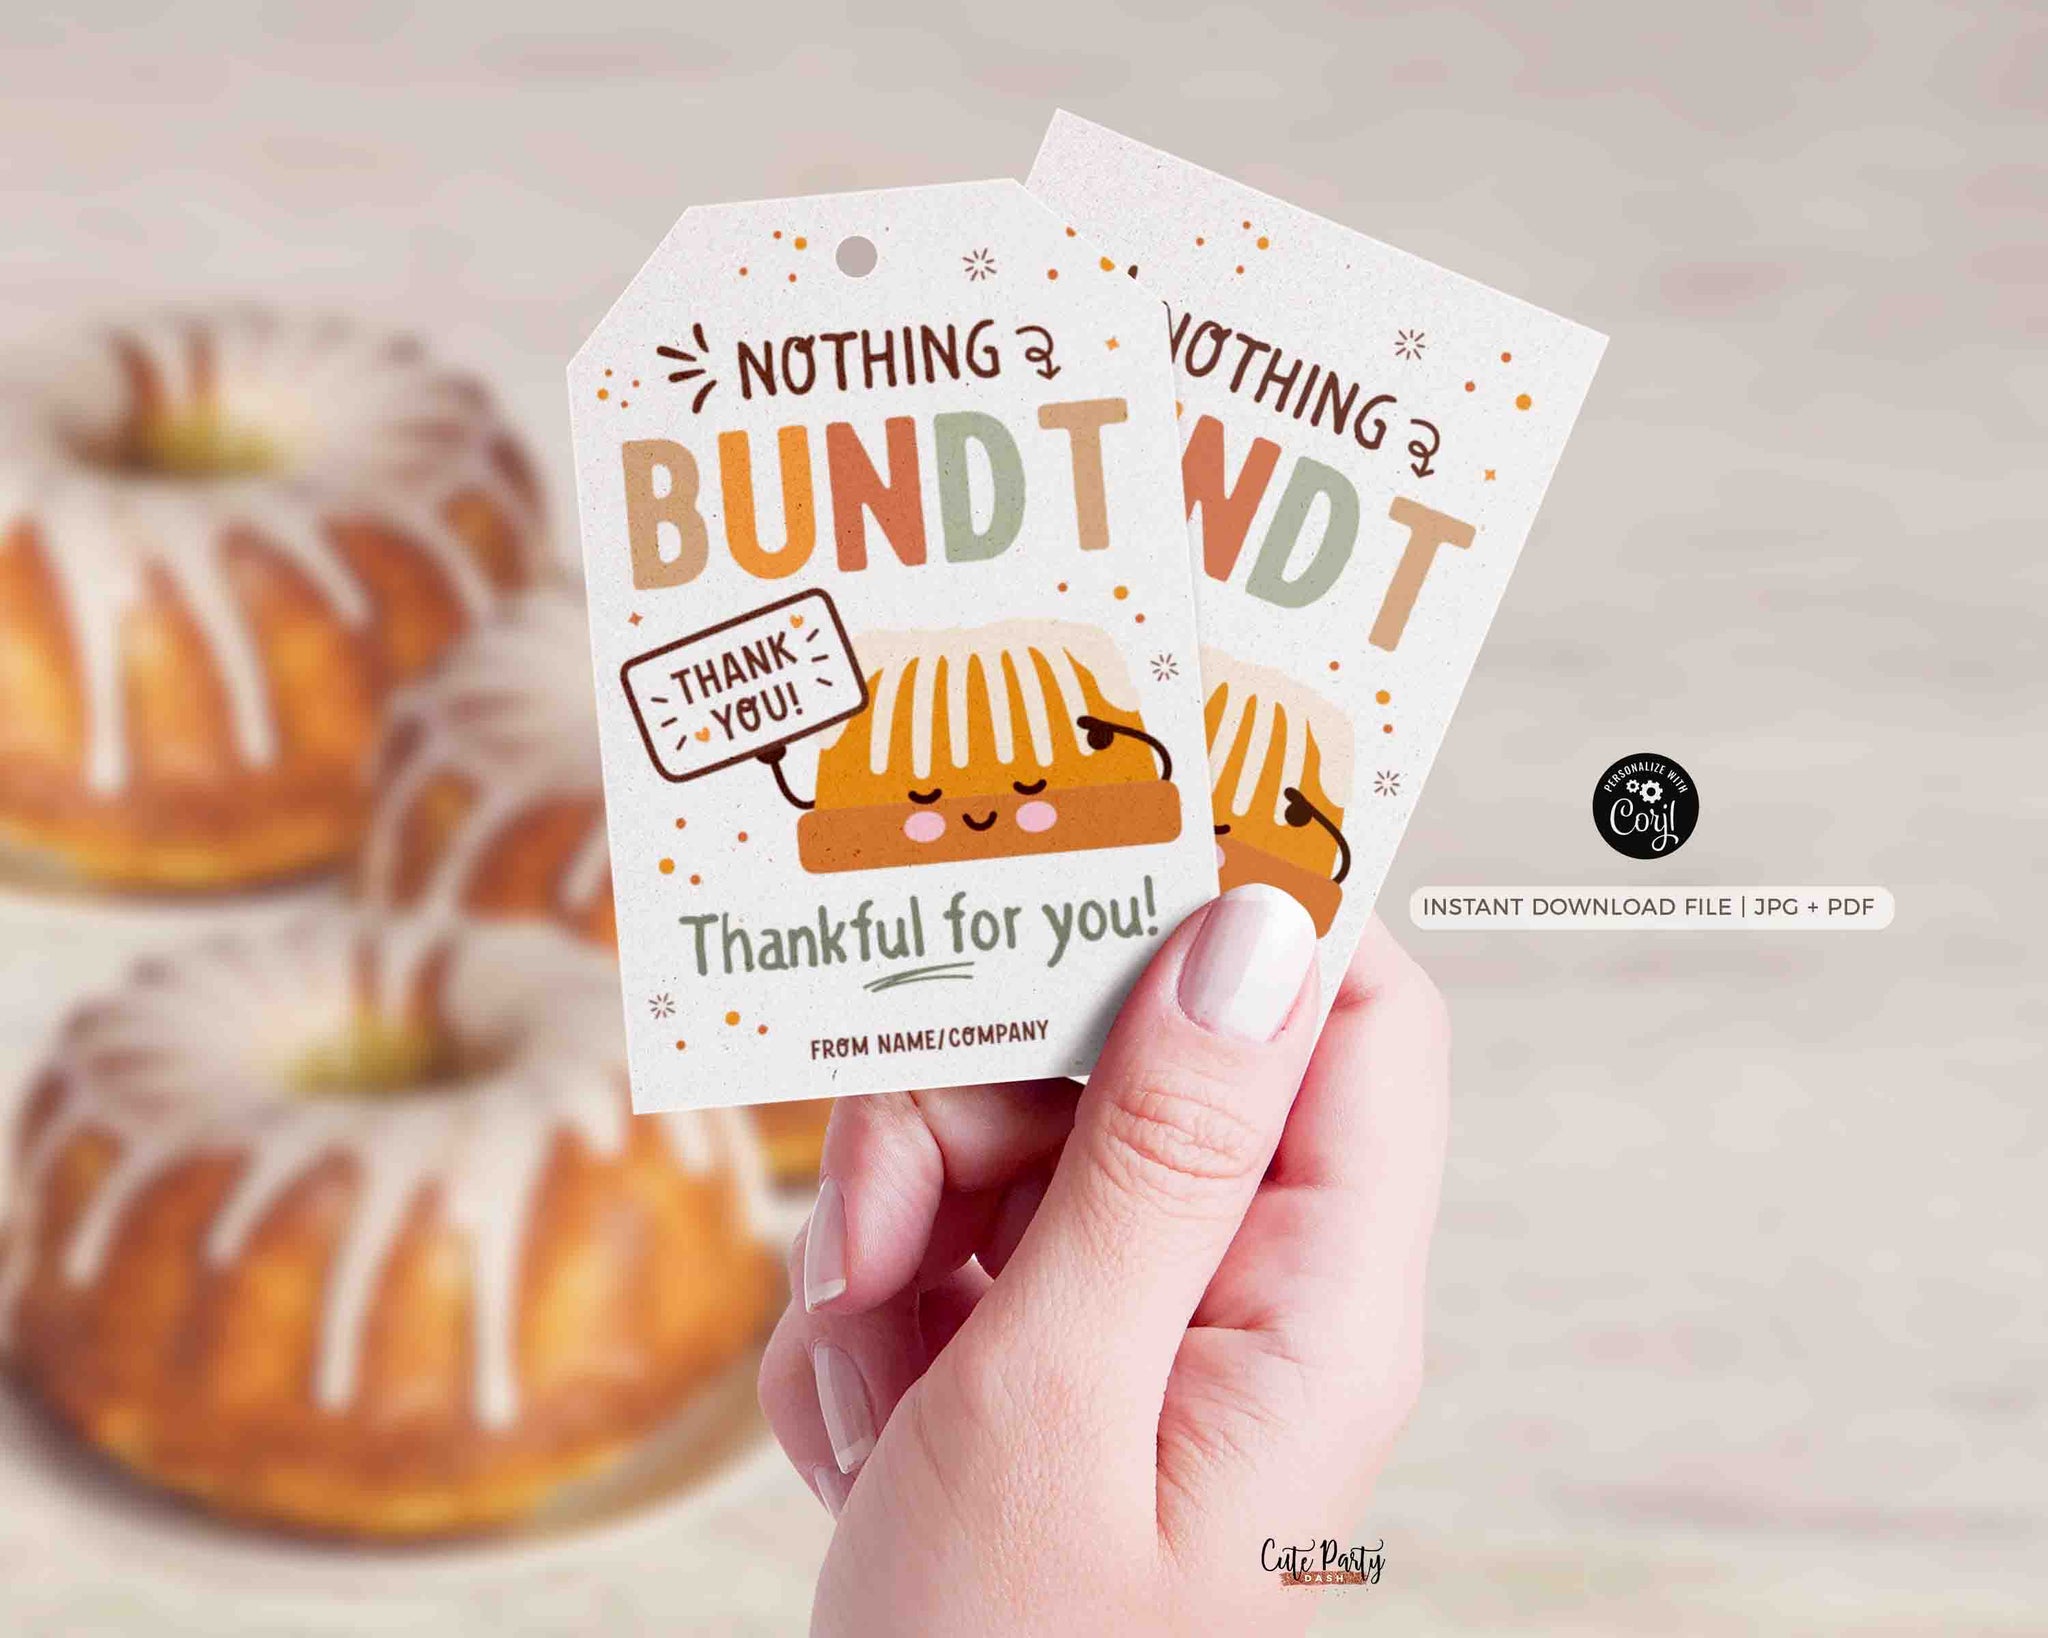 Thanksgiving Bundt Cake Tag INSTANT DOWNLOAD Fall Appreciation EDITABLE Nothing Bundt Thankful for you Cake Tags Favor Thank You Bundt-ch